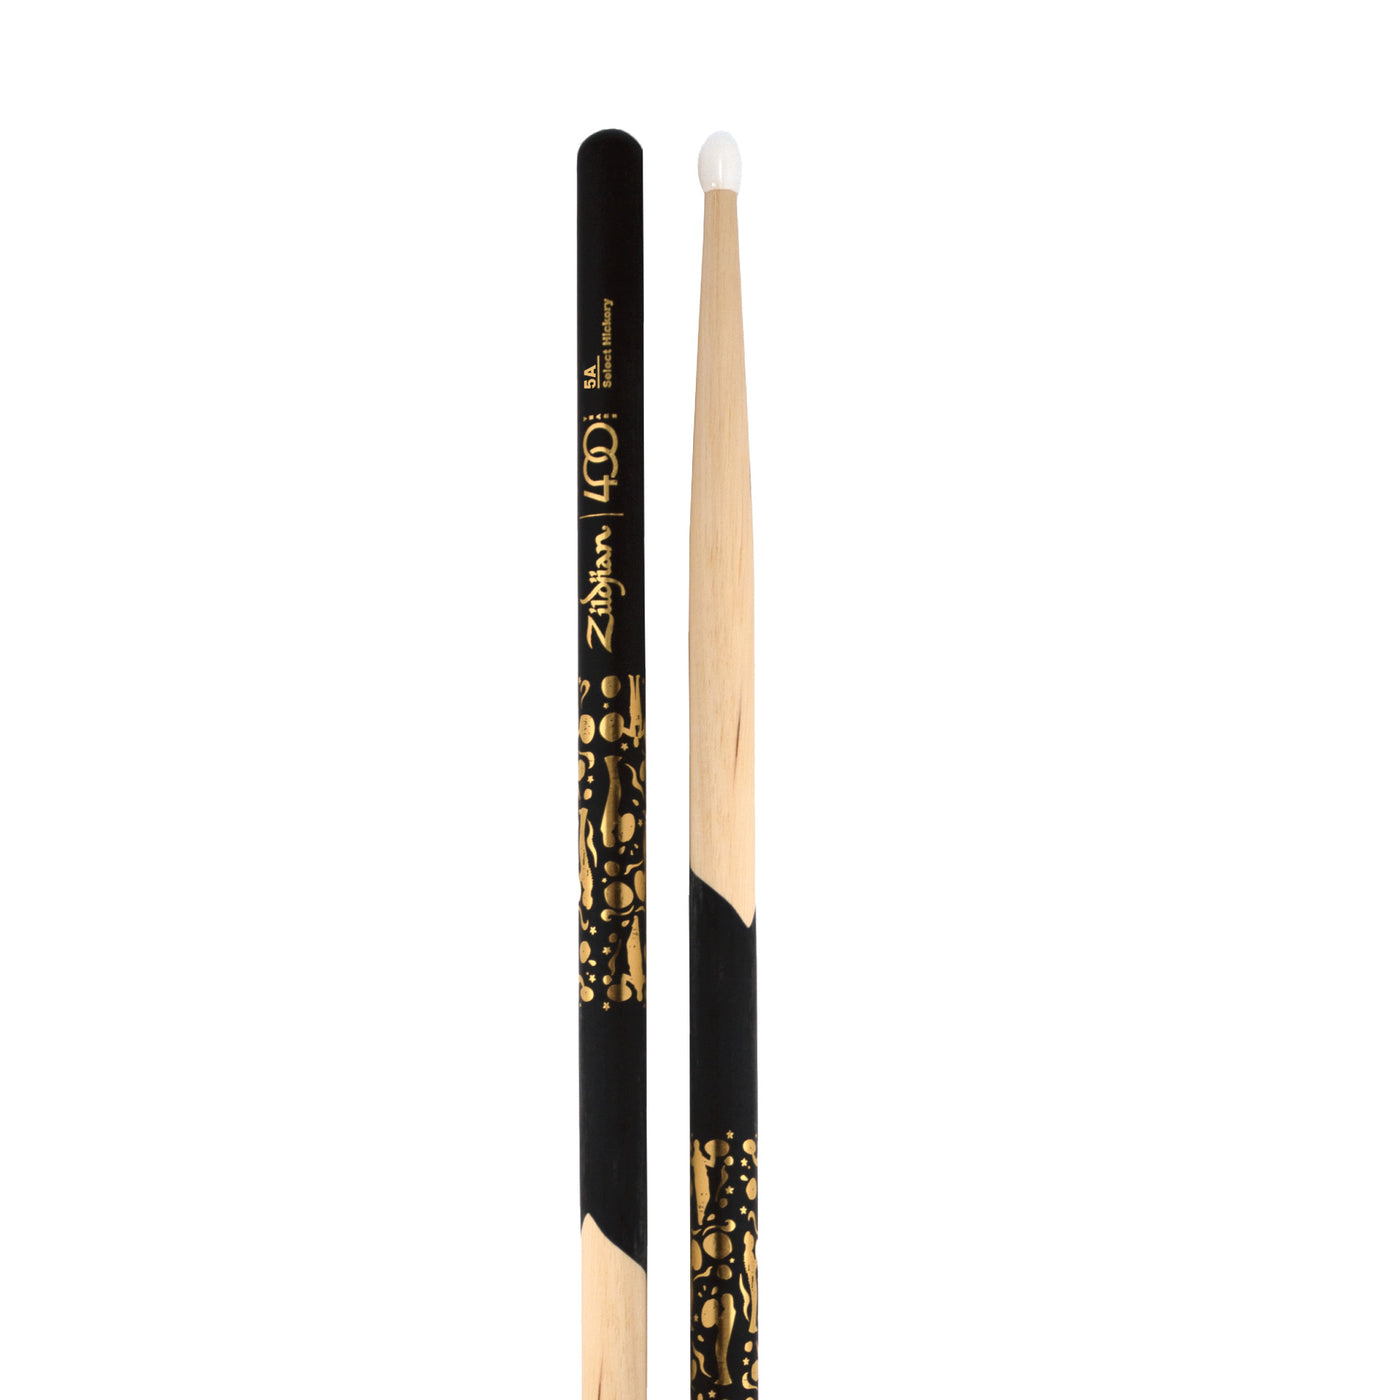 Zildjian Limited Edition 400th Anniversary 5A Nylon Dip Drumstick (Z5AND-400)